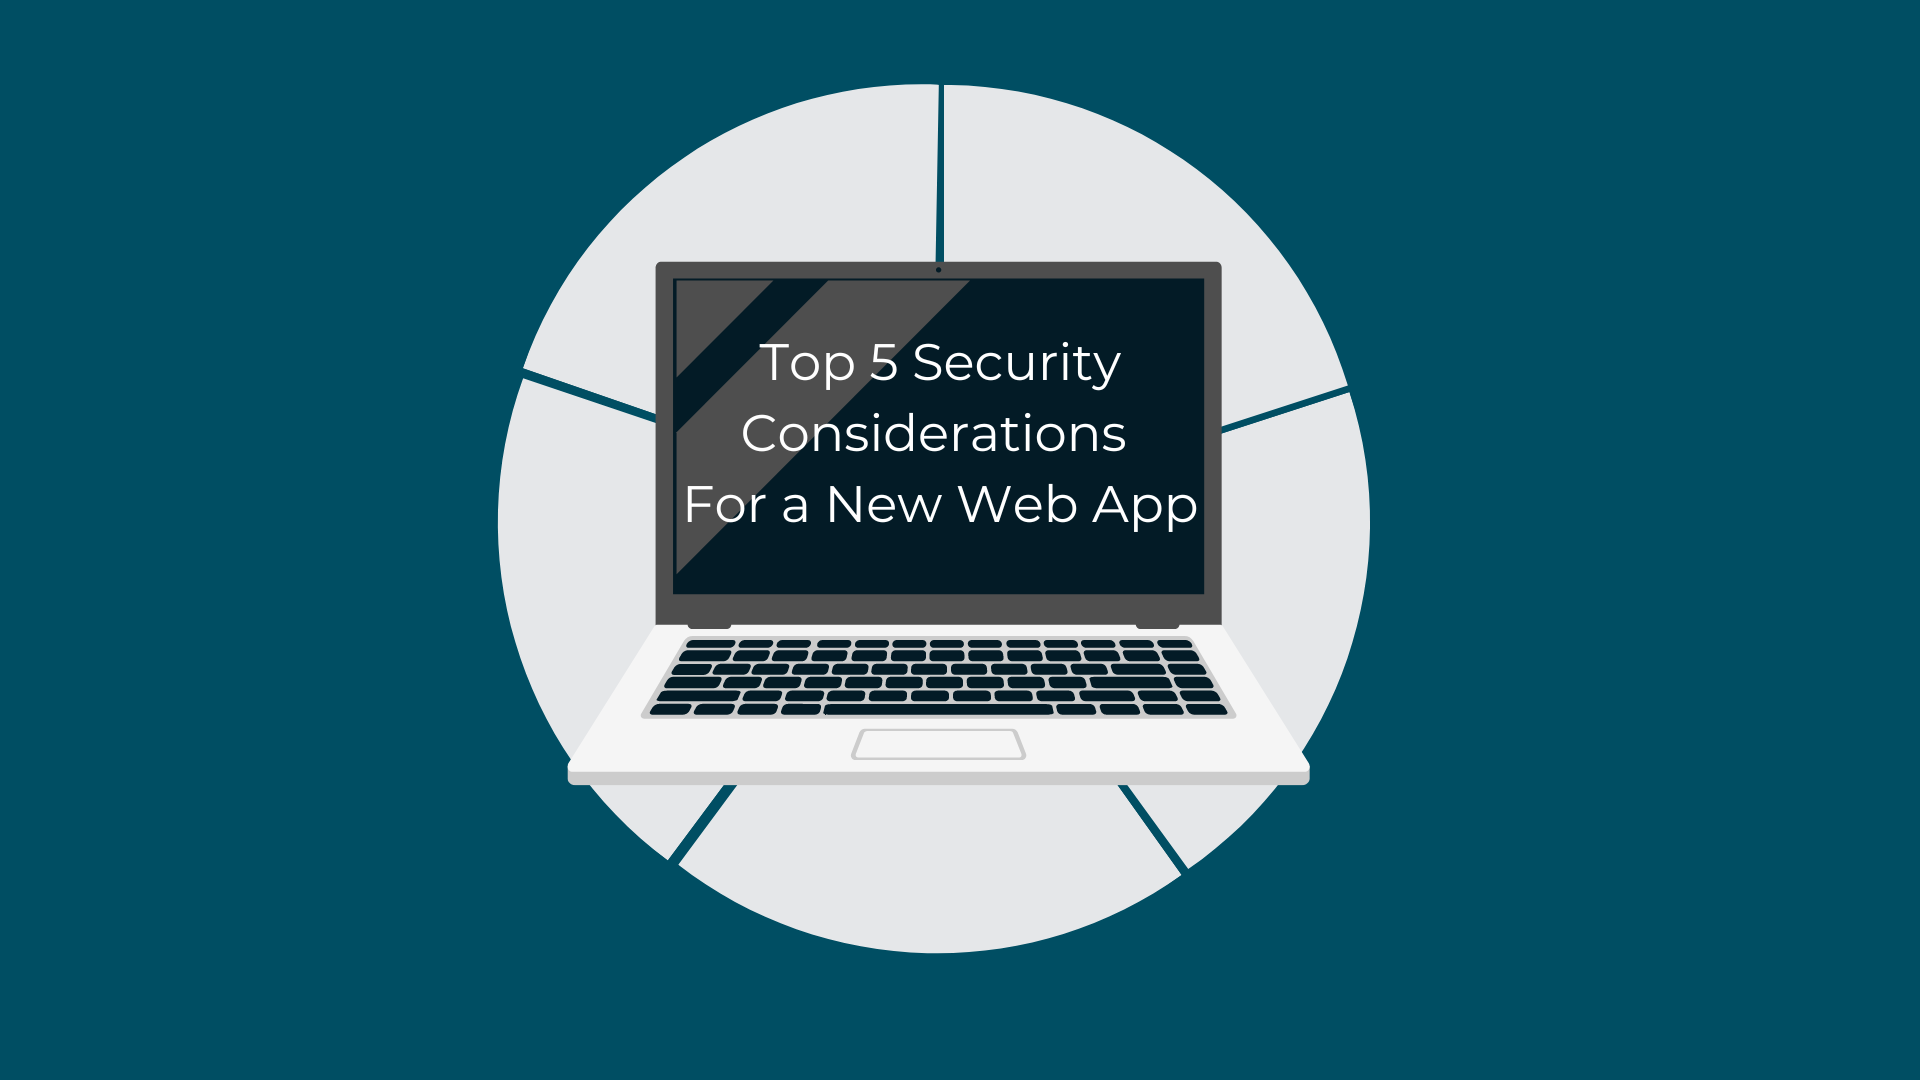 Top 5 Security Considerations for a New Web App - 5. Establishing an Dependency Patching Plan